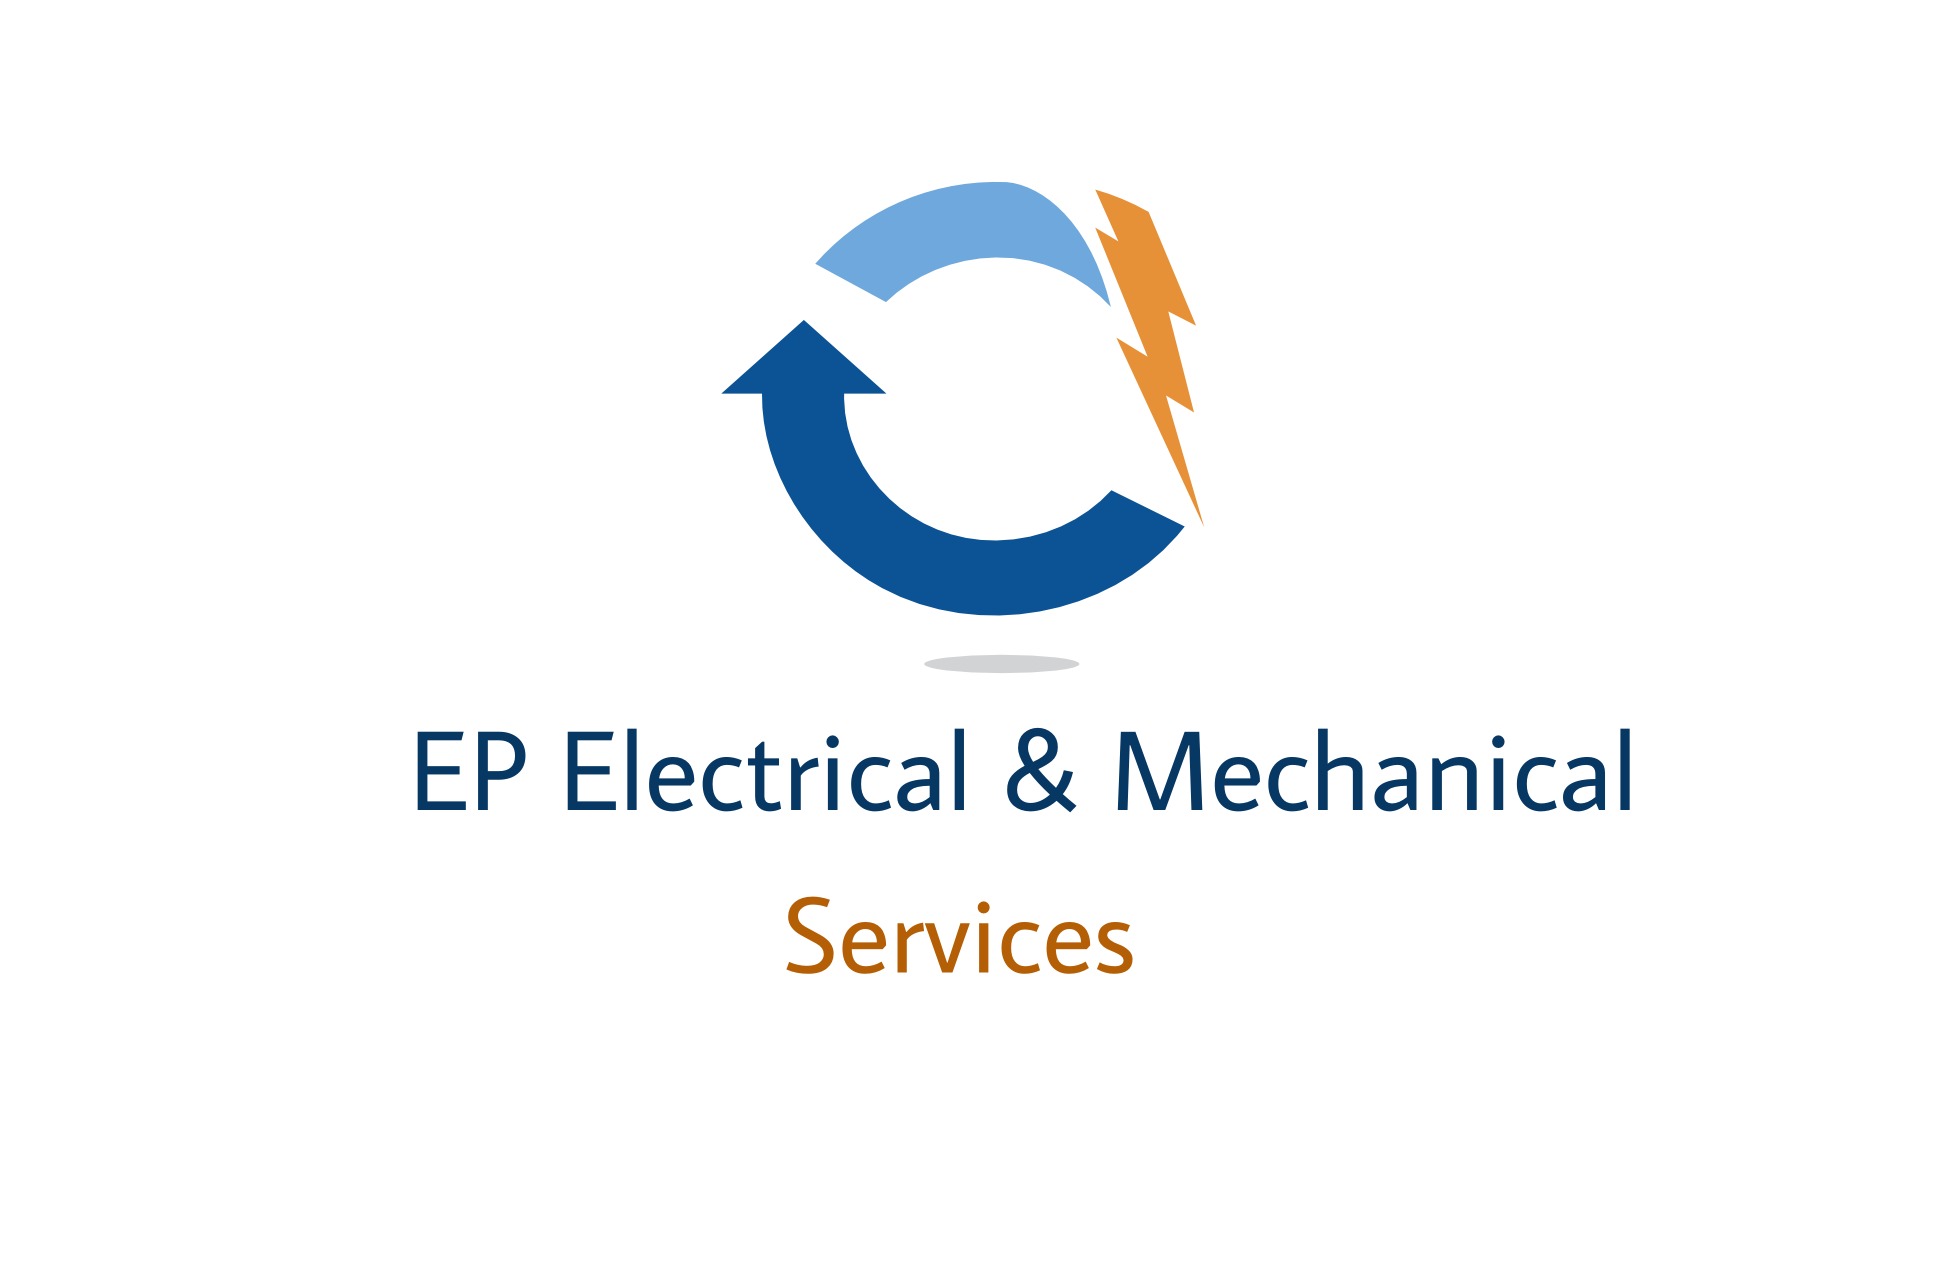 EP Electrical & Mechanical Services Logo